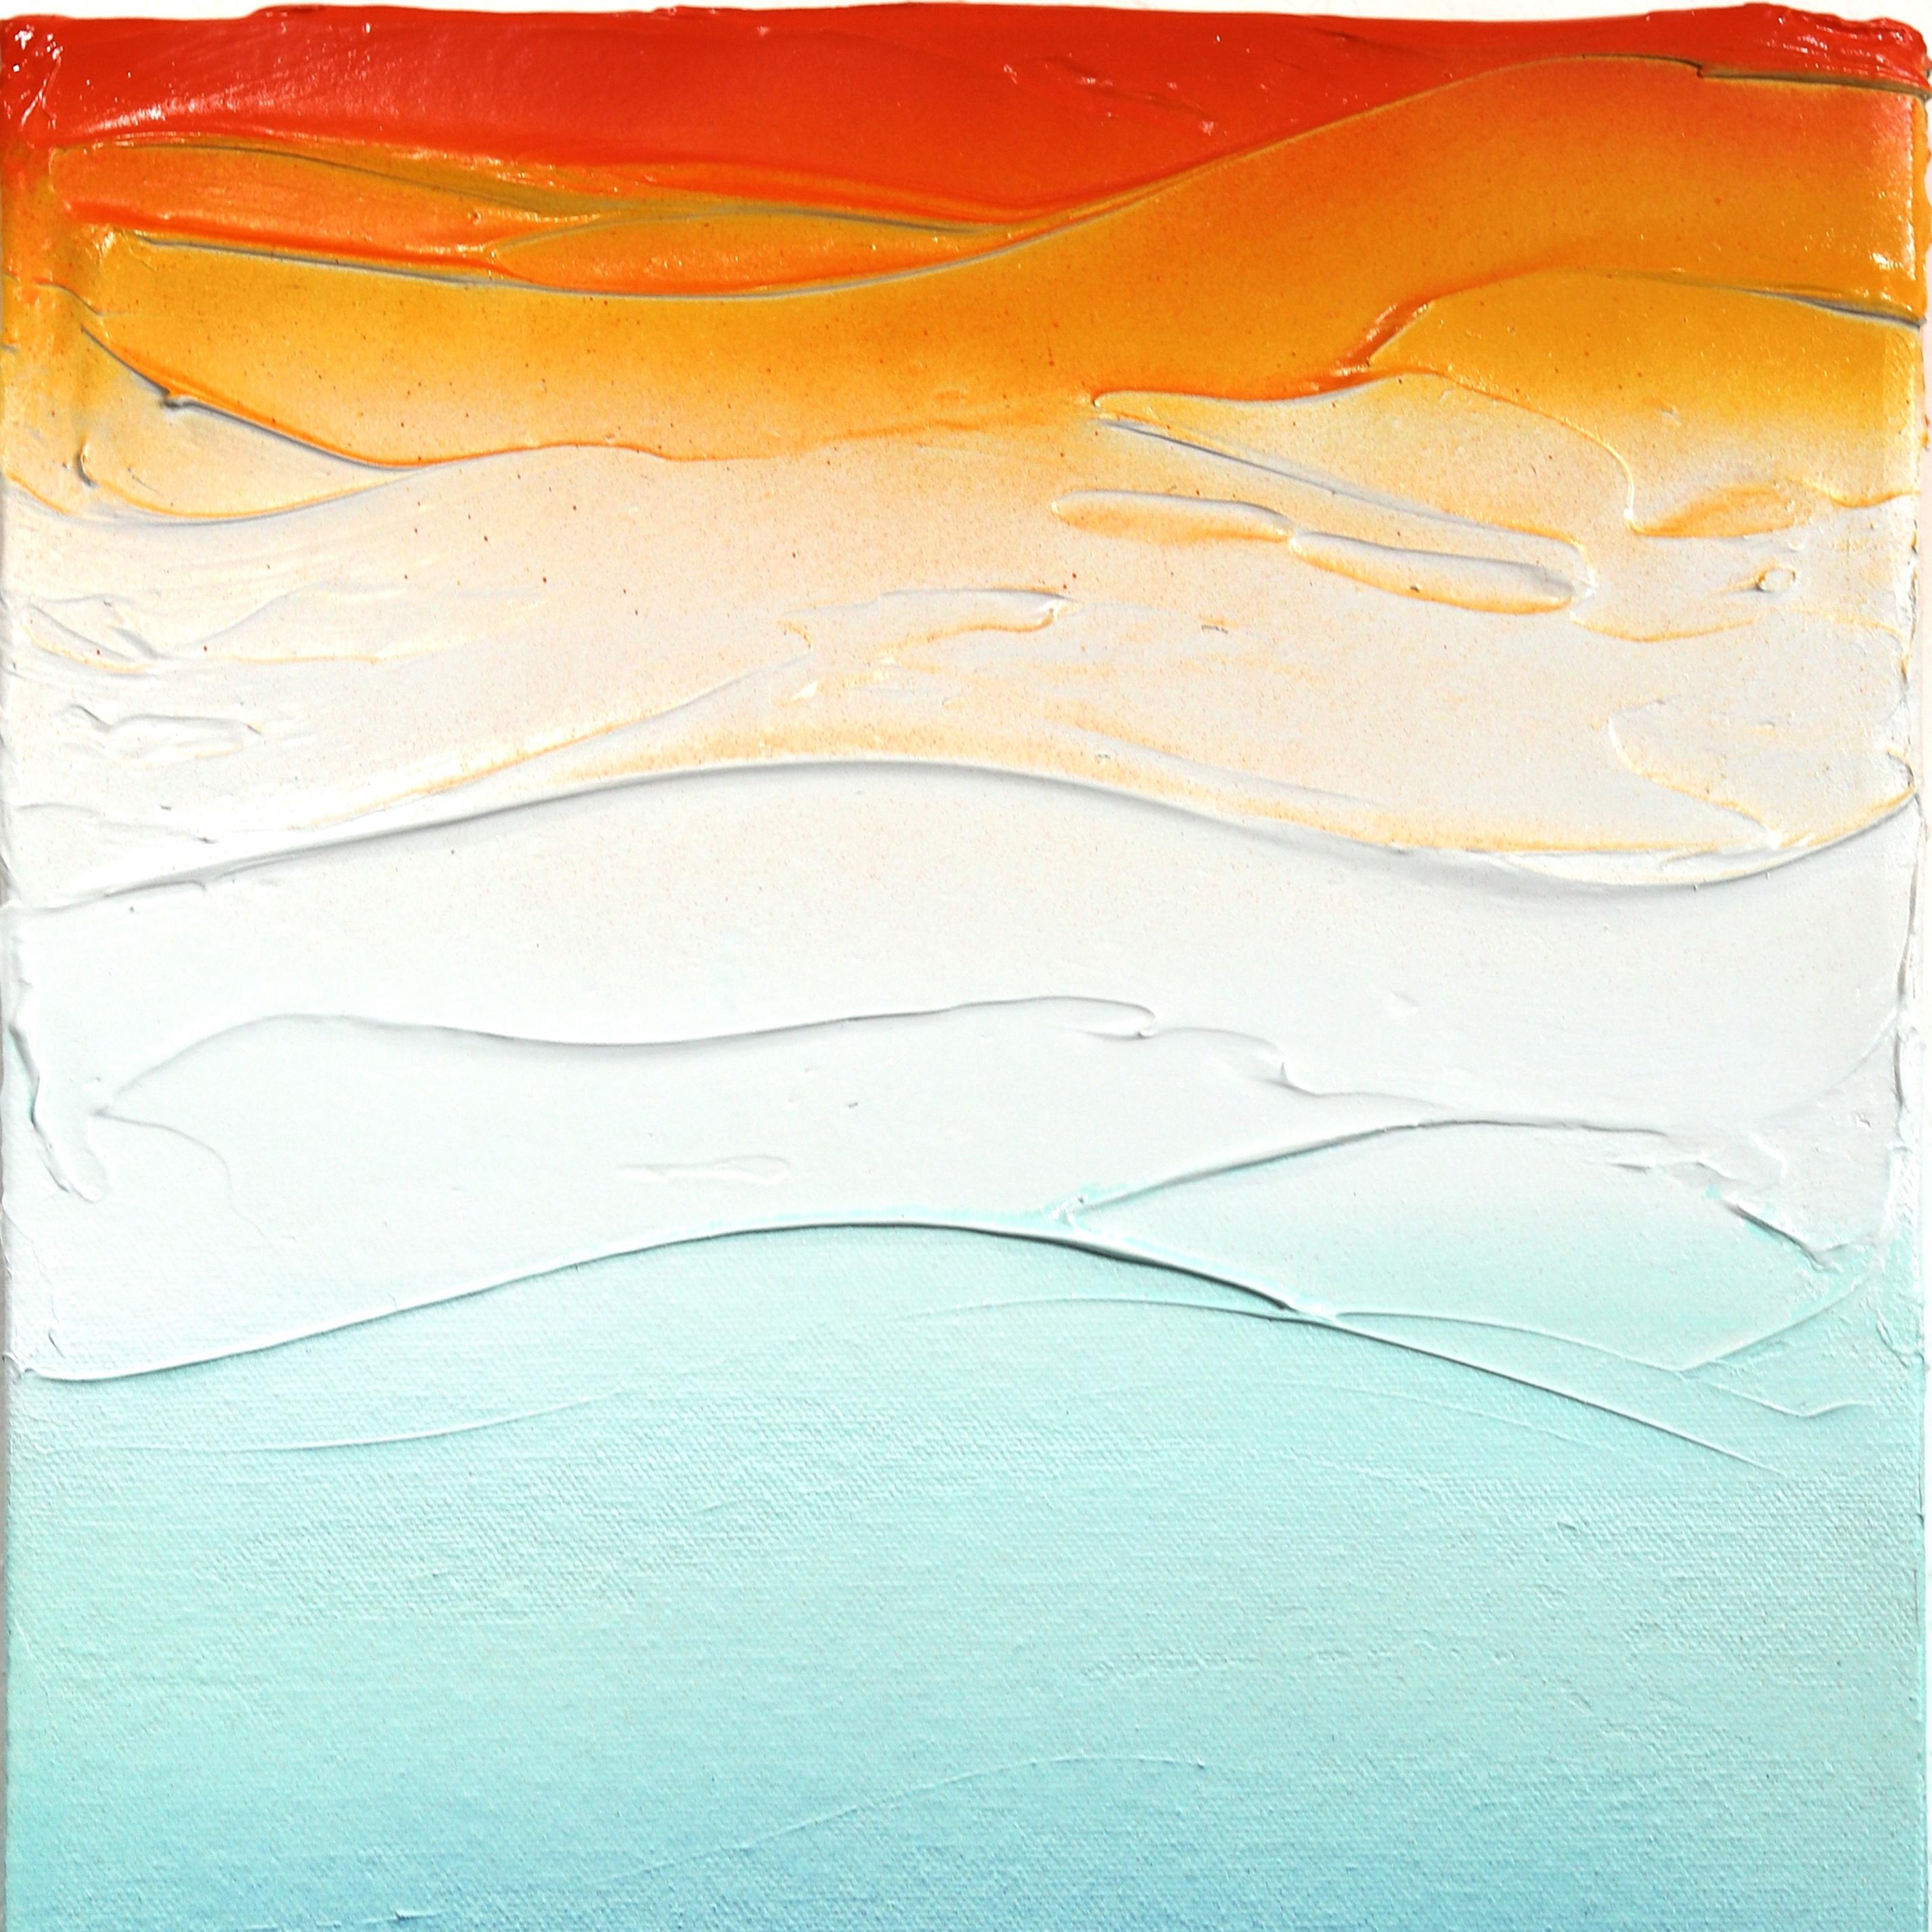 Sunkissed 4  -  Original Abstract Artwork with Texture, Resin - Contemporary Painting by Nichole McDaniel